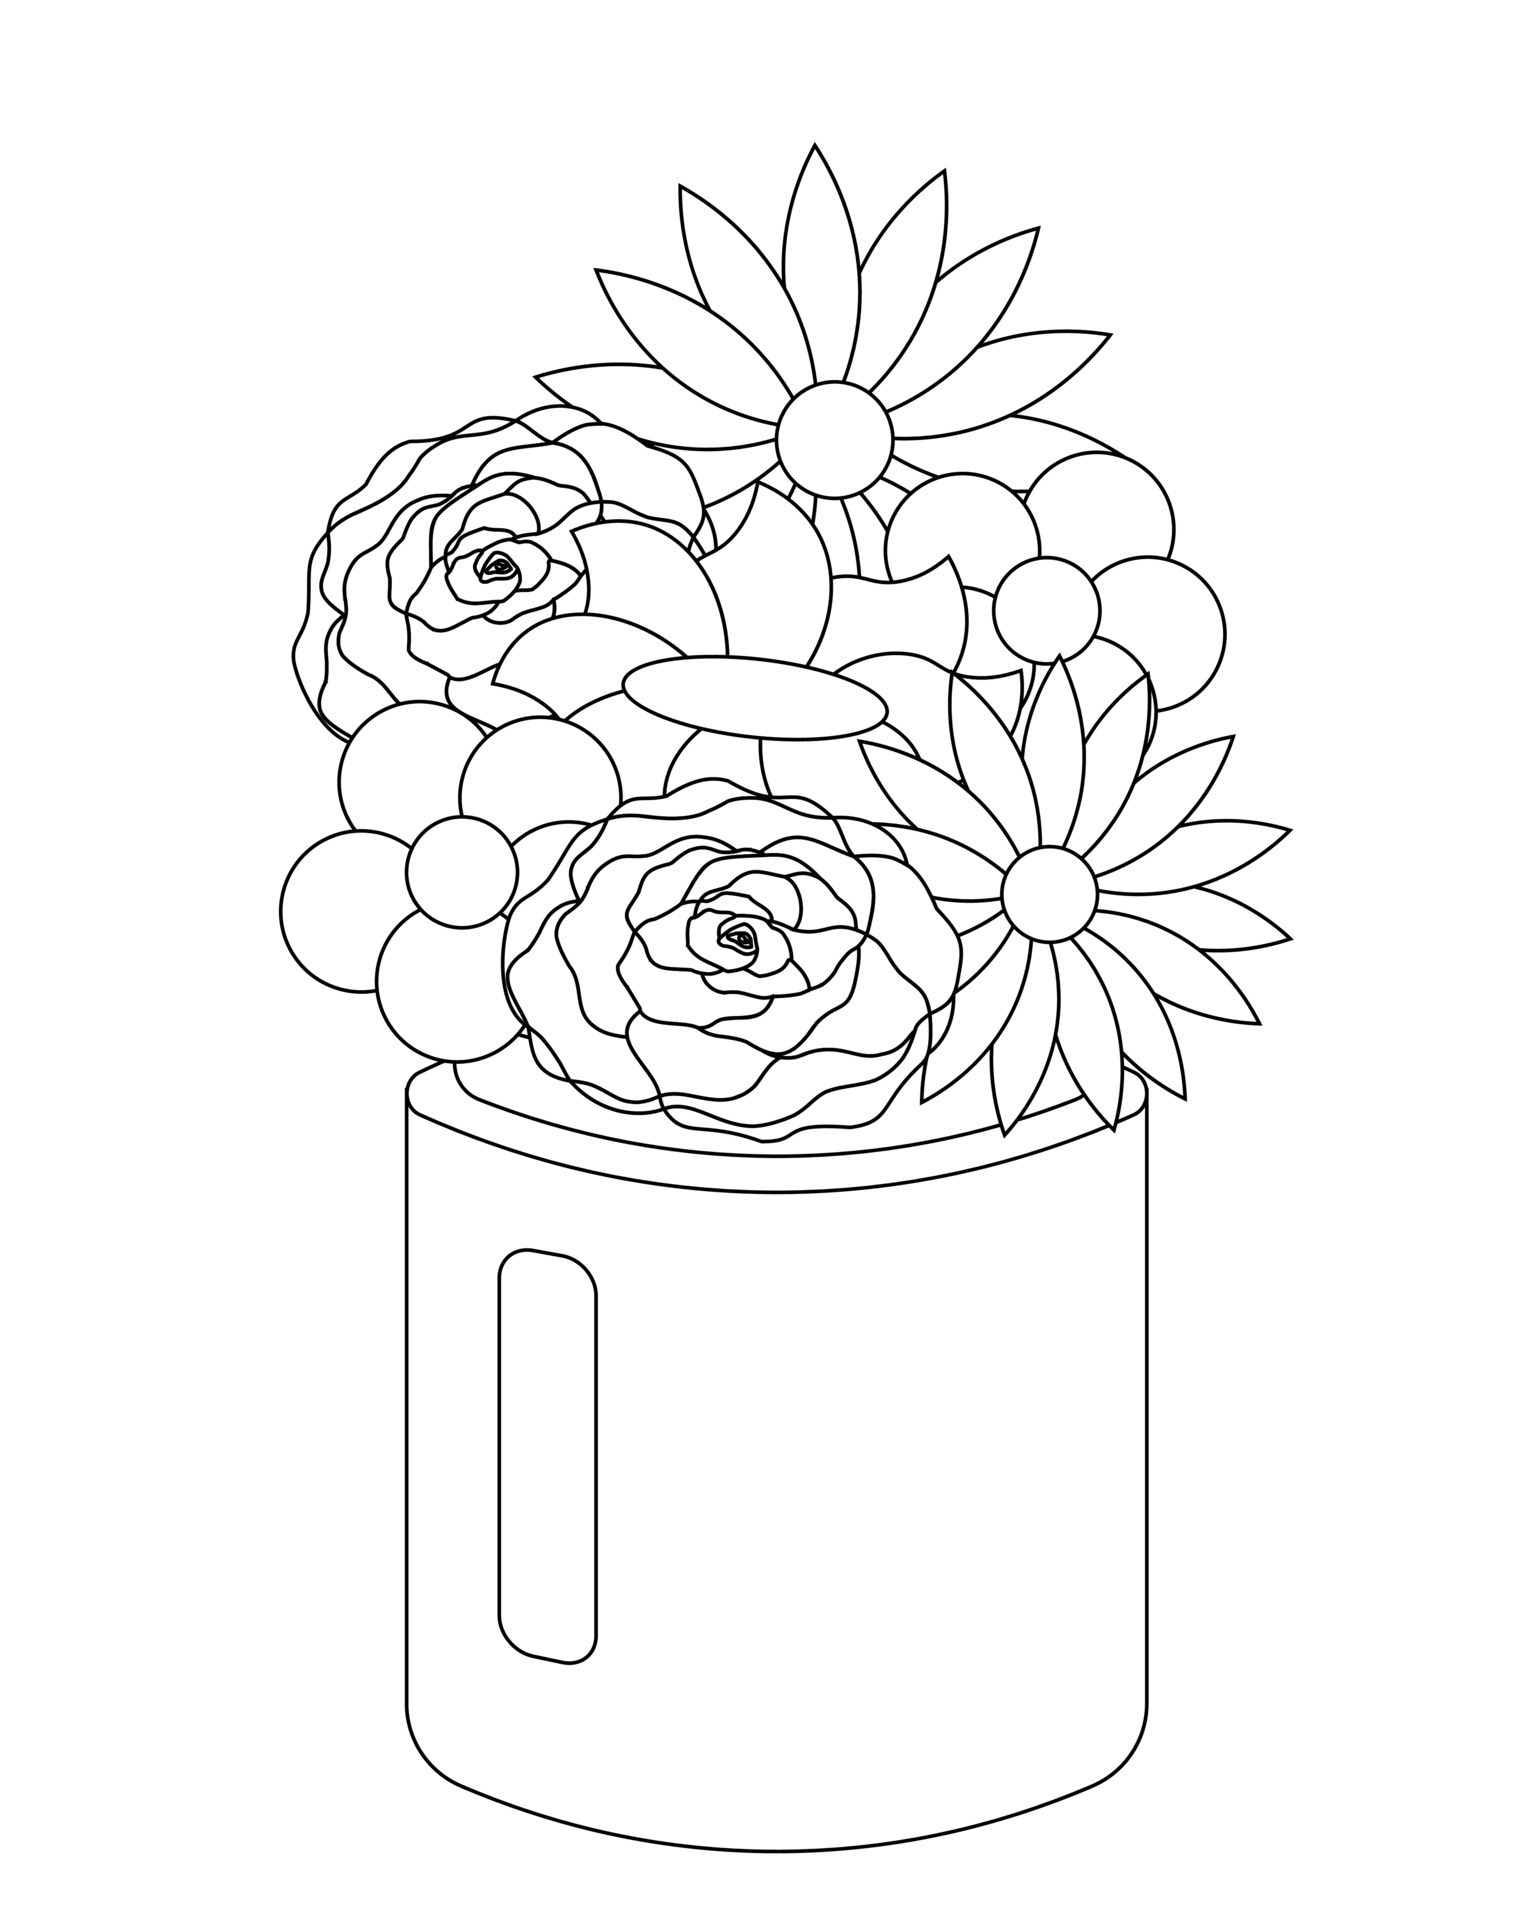 Drawing sketch of vase with flowers Royalty Free Vector